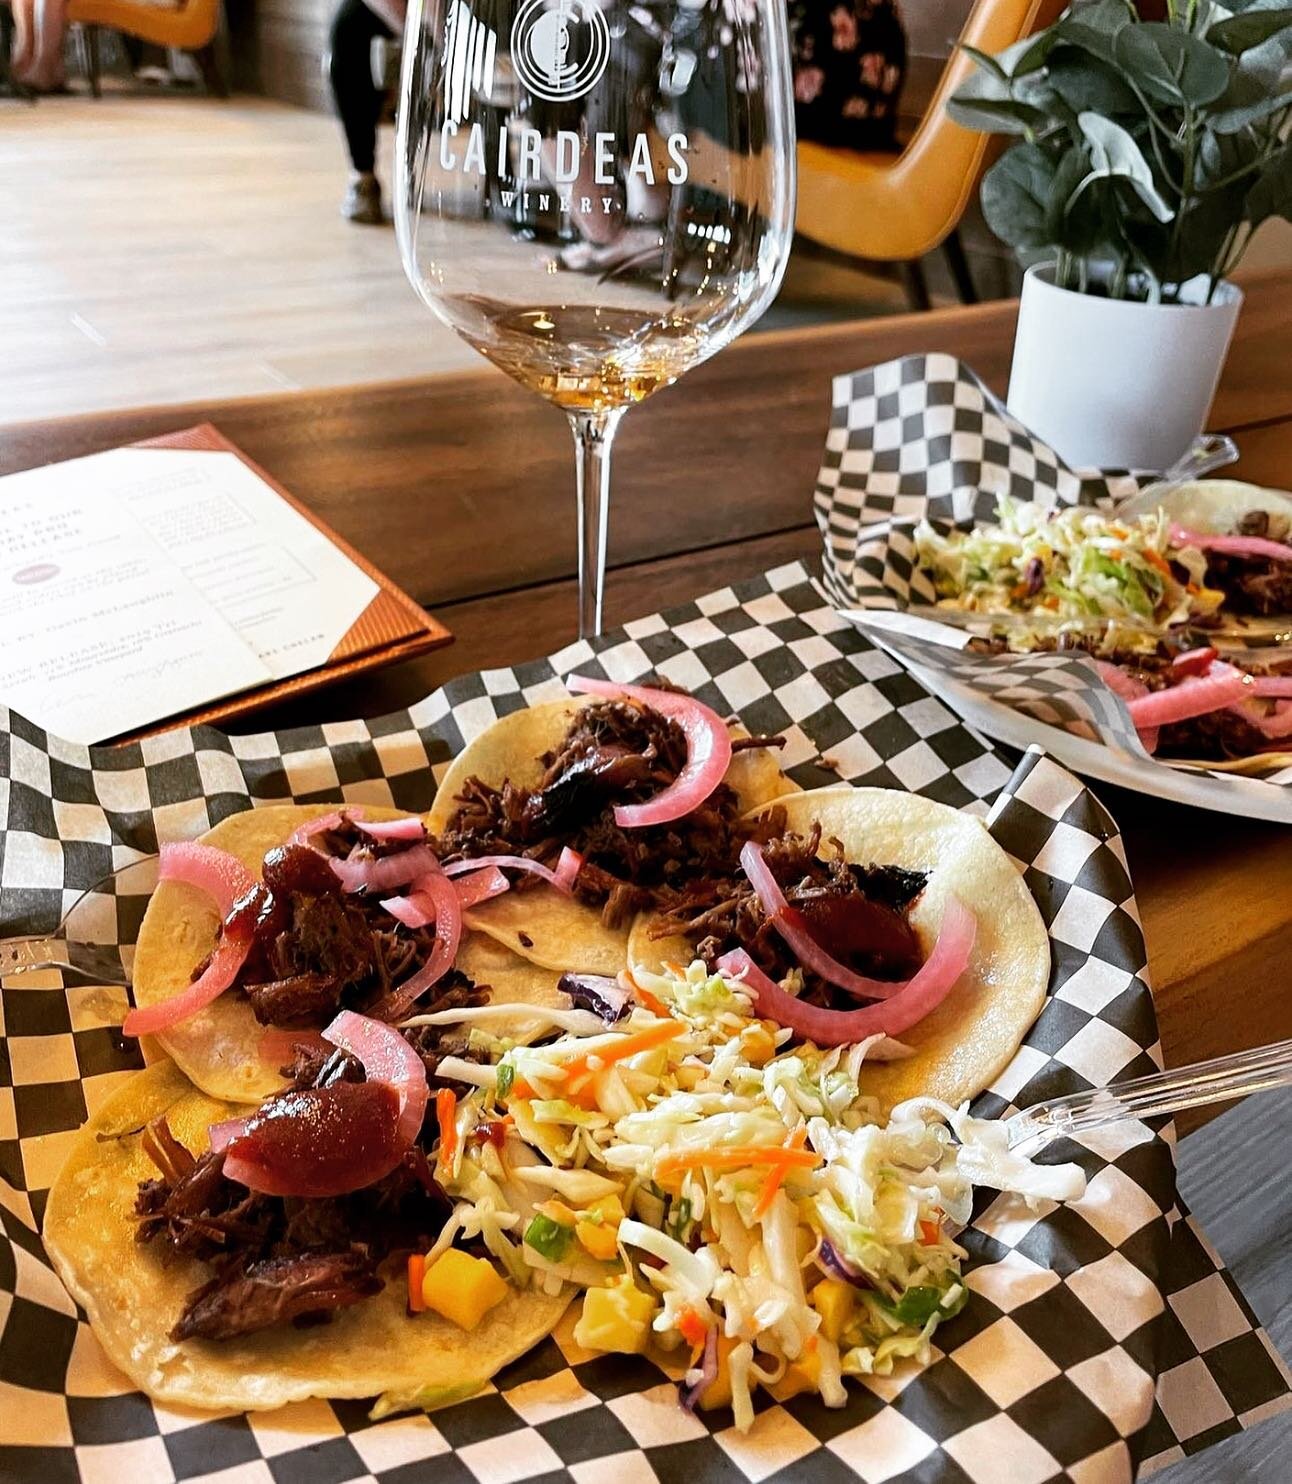 Richards Too Good Applewood Smoked Beef Brisket Street Tacos with our Mango Citrus Coleslaw!!
#bbq #tacos #richardstoogoodseattlebbq #richardstoogoodproducts #mango #coleslaw #forthepeople #lunch #dinner #brisket #smoked #chelan #winery #sunshine #fu